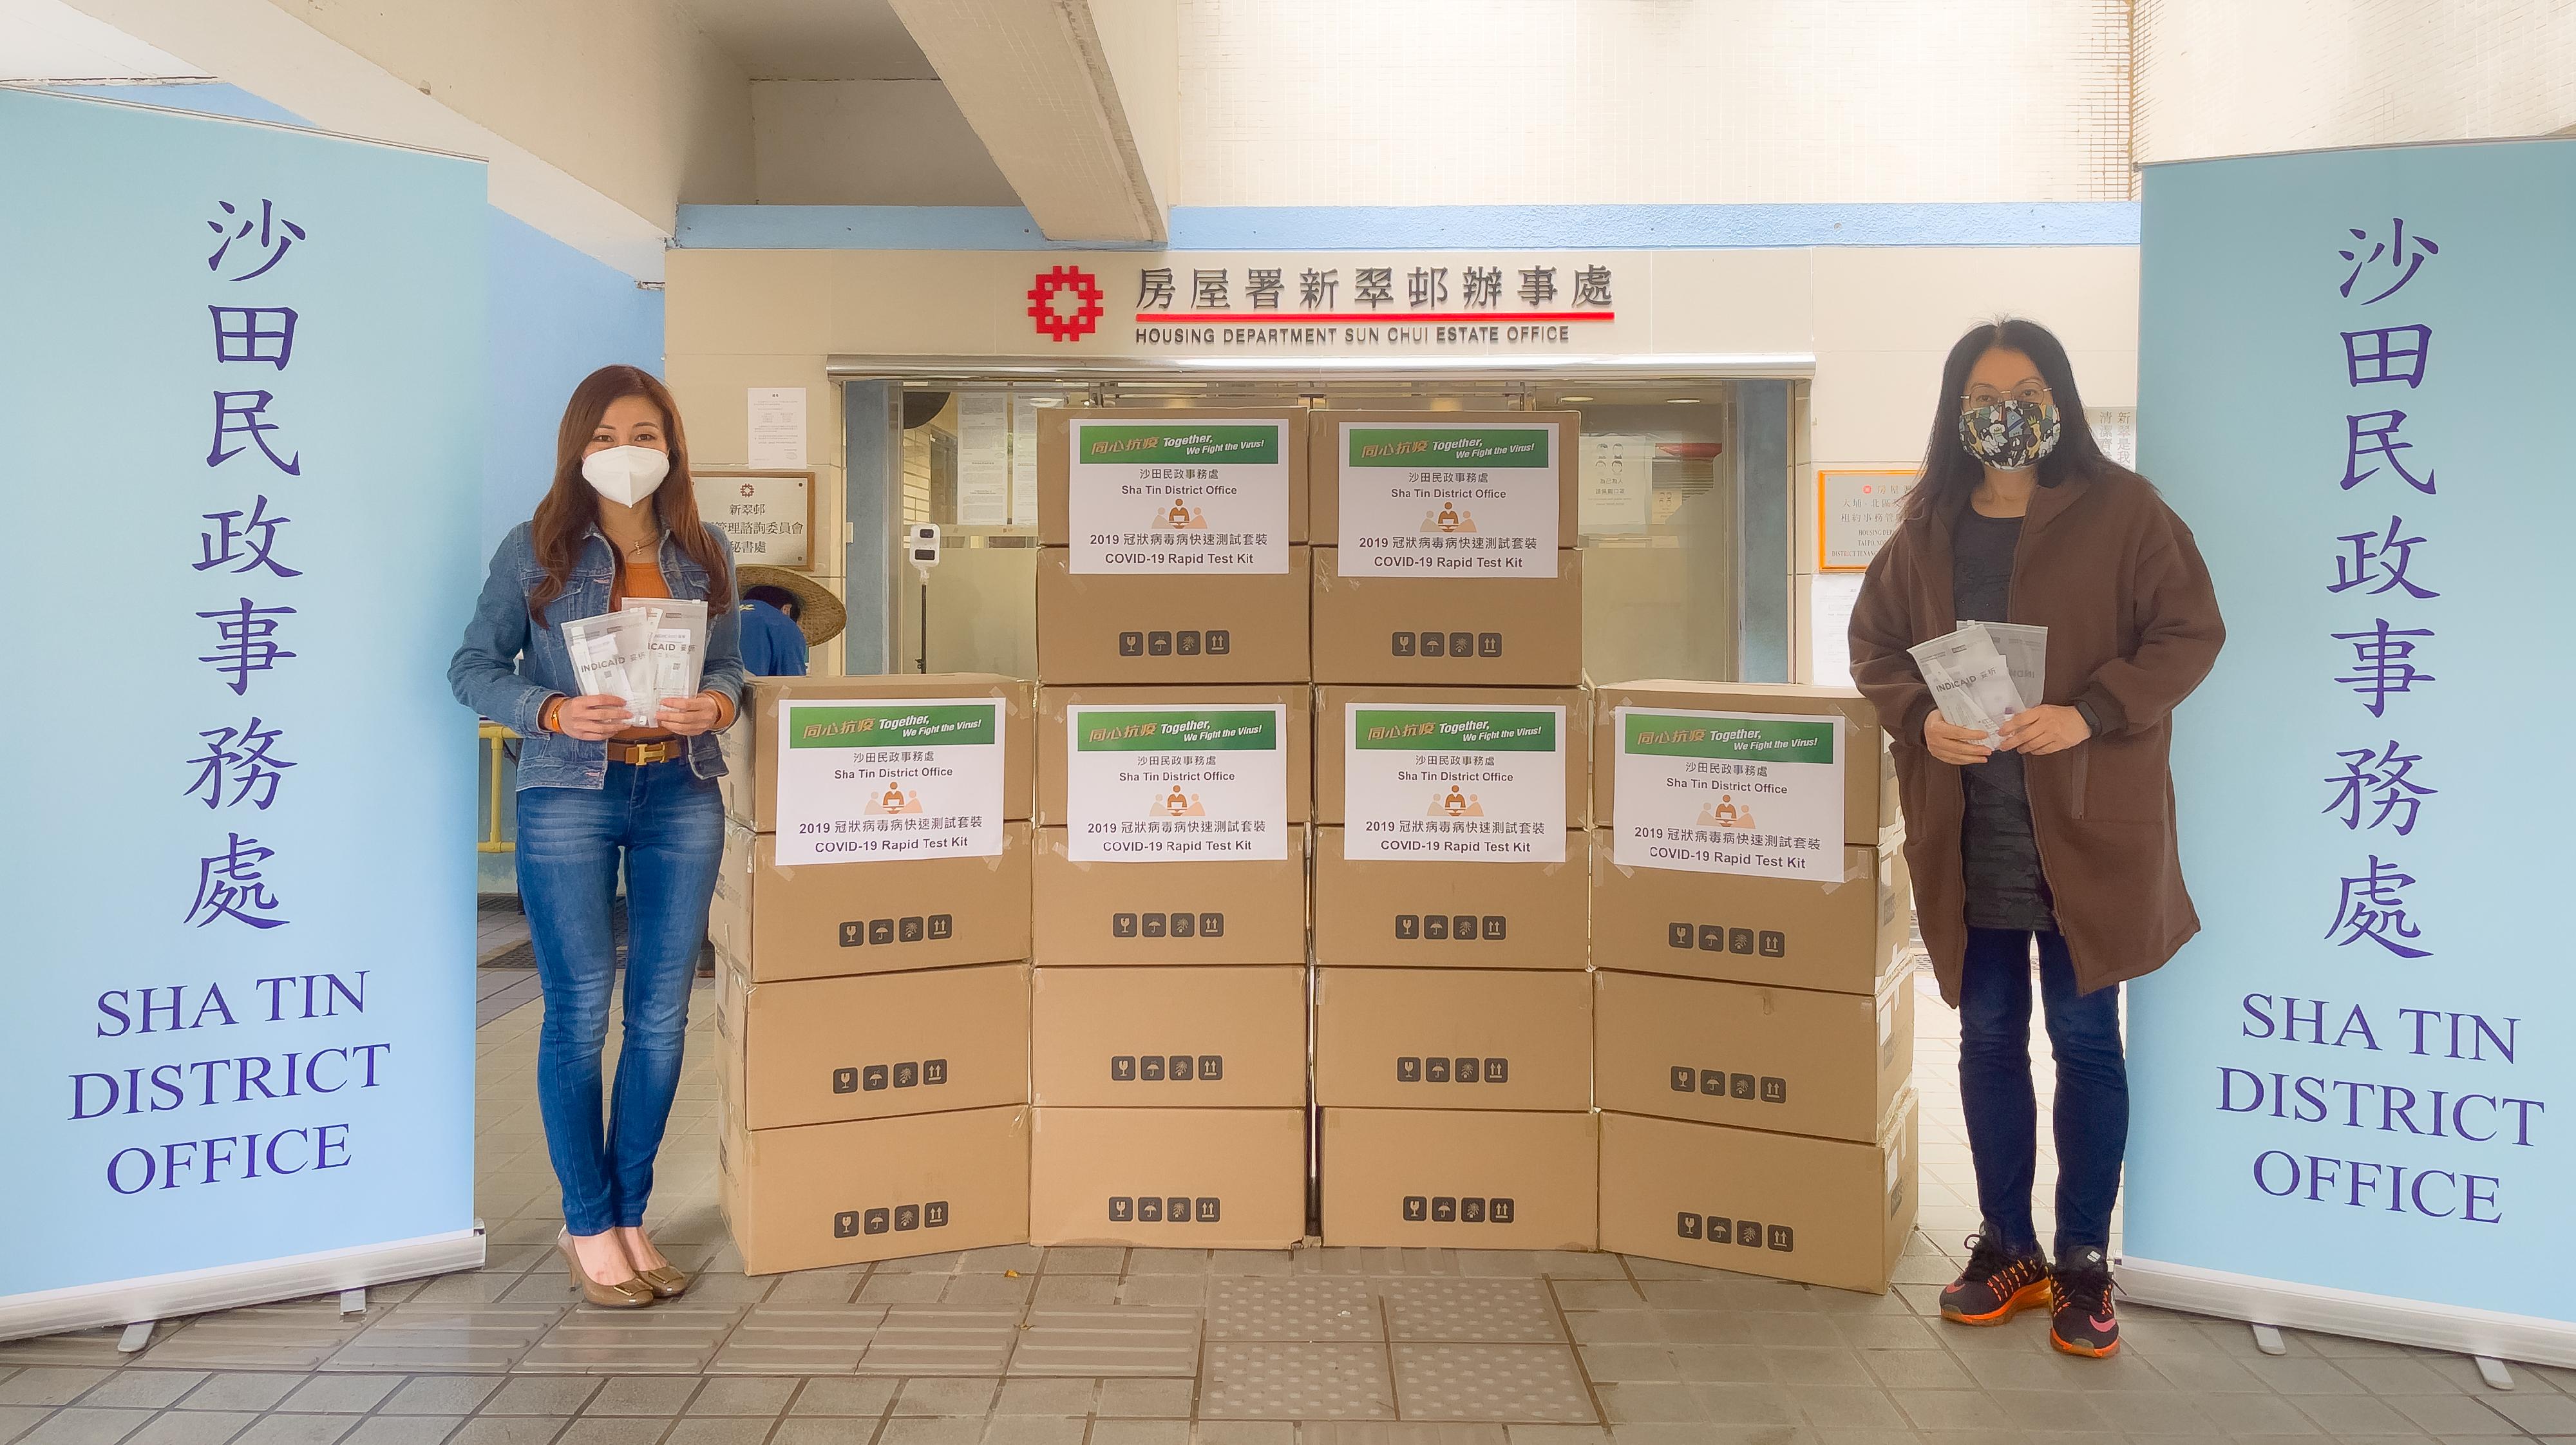 The Sha Tin District Office today (March 23) distributed COVID-19 rapid test kits to households, cleansing workers and property management staff living and working in Sun Chui Estate for voluntary testing through the Housing Department and the property management company.